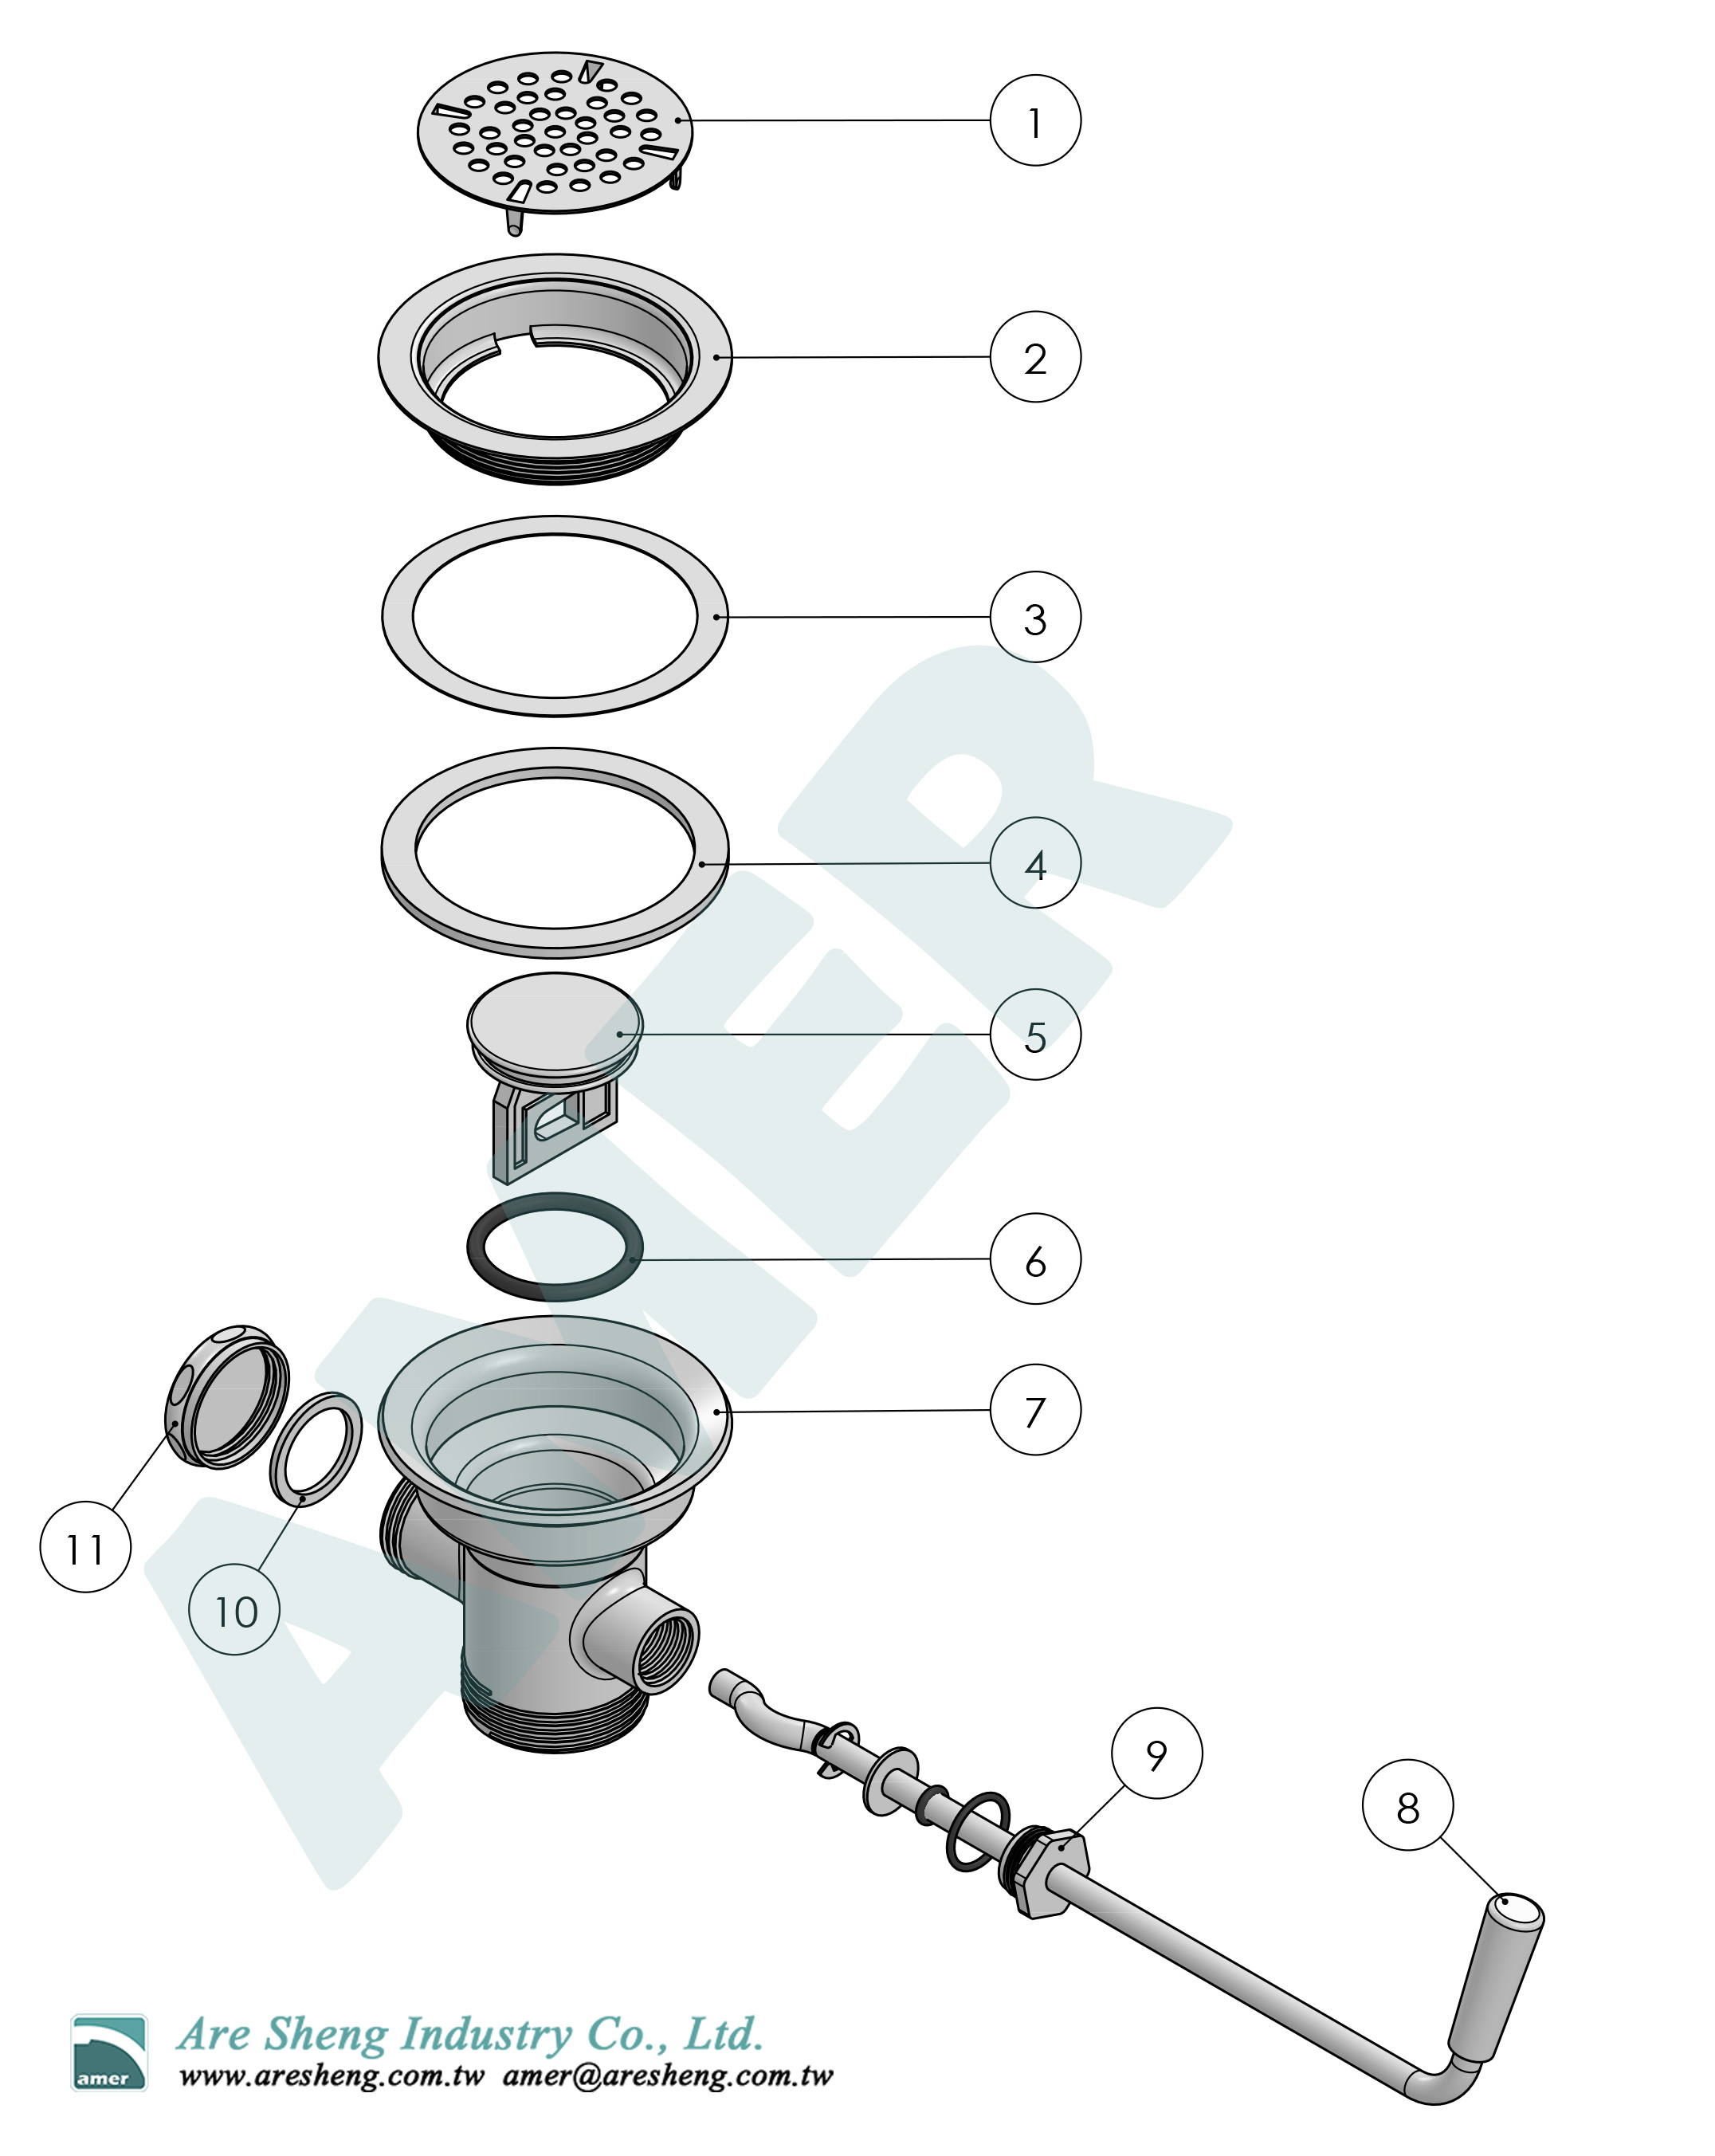 Twist handle waste valve explosion drawing - Are Sheng